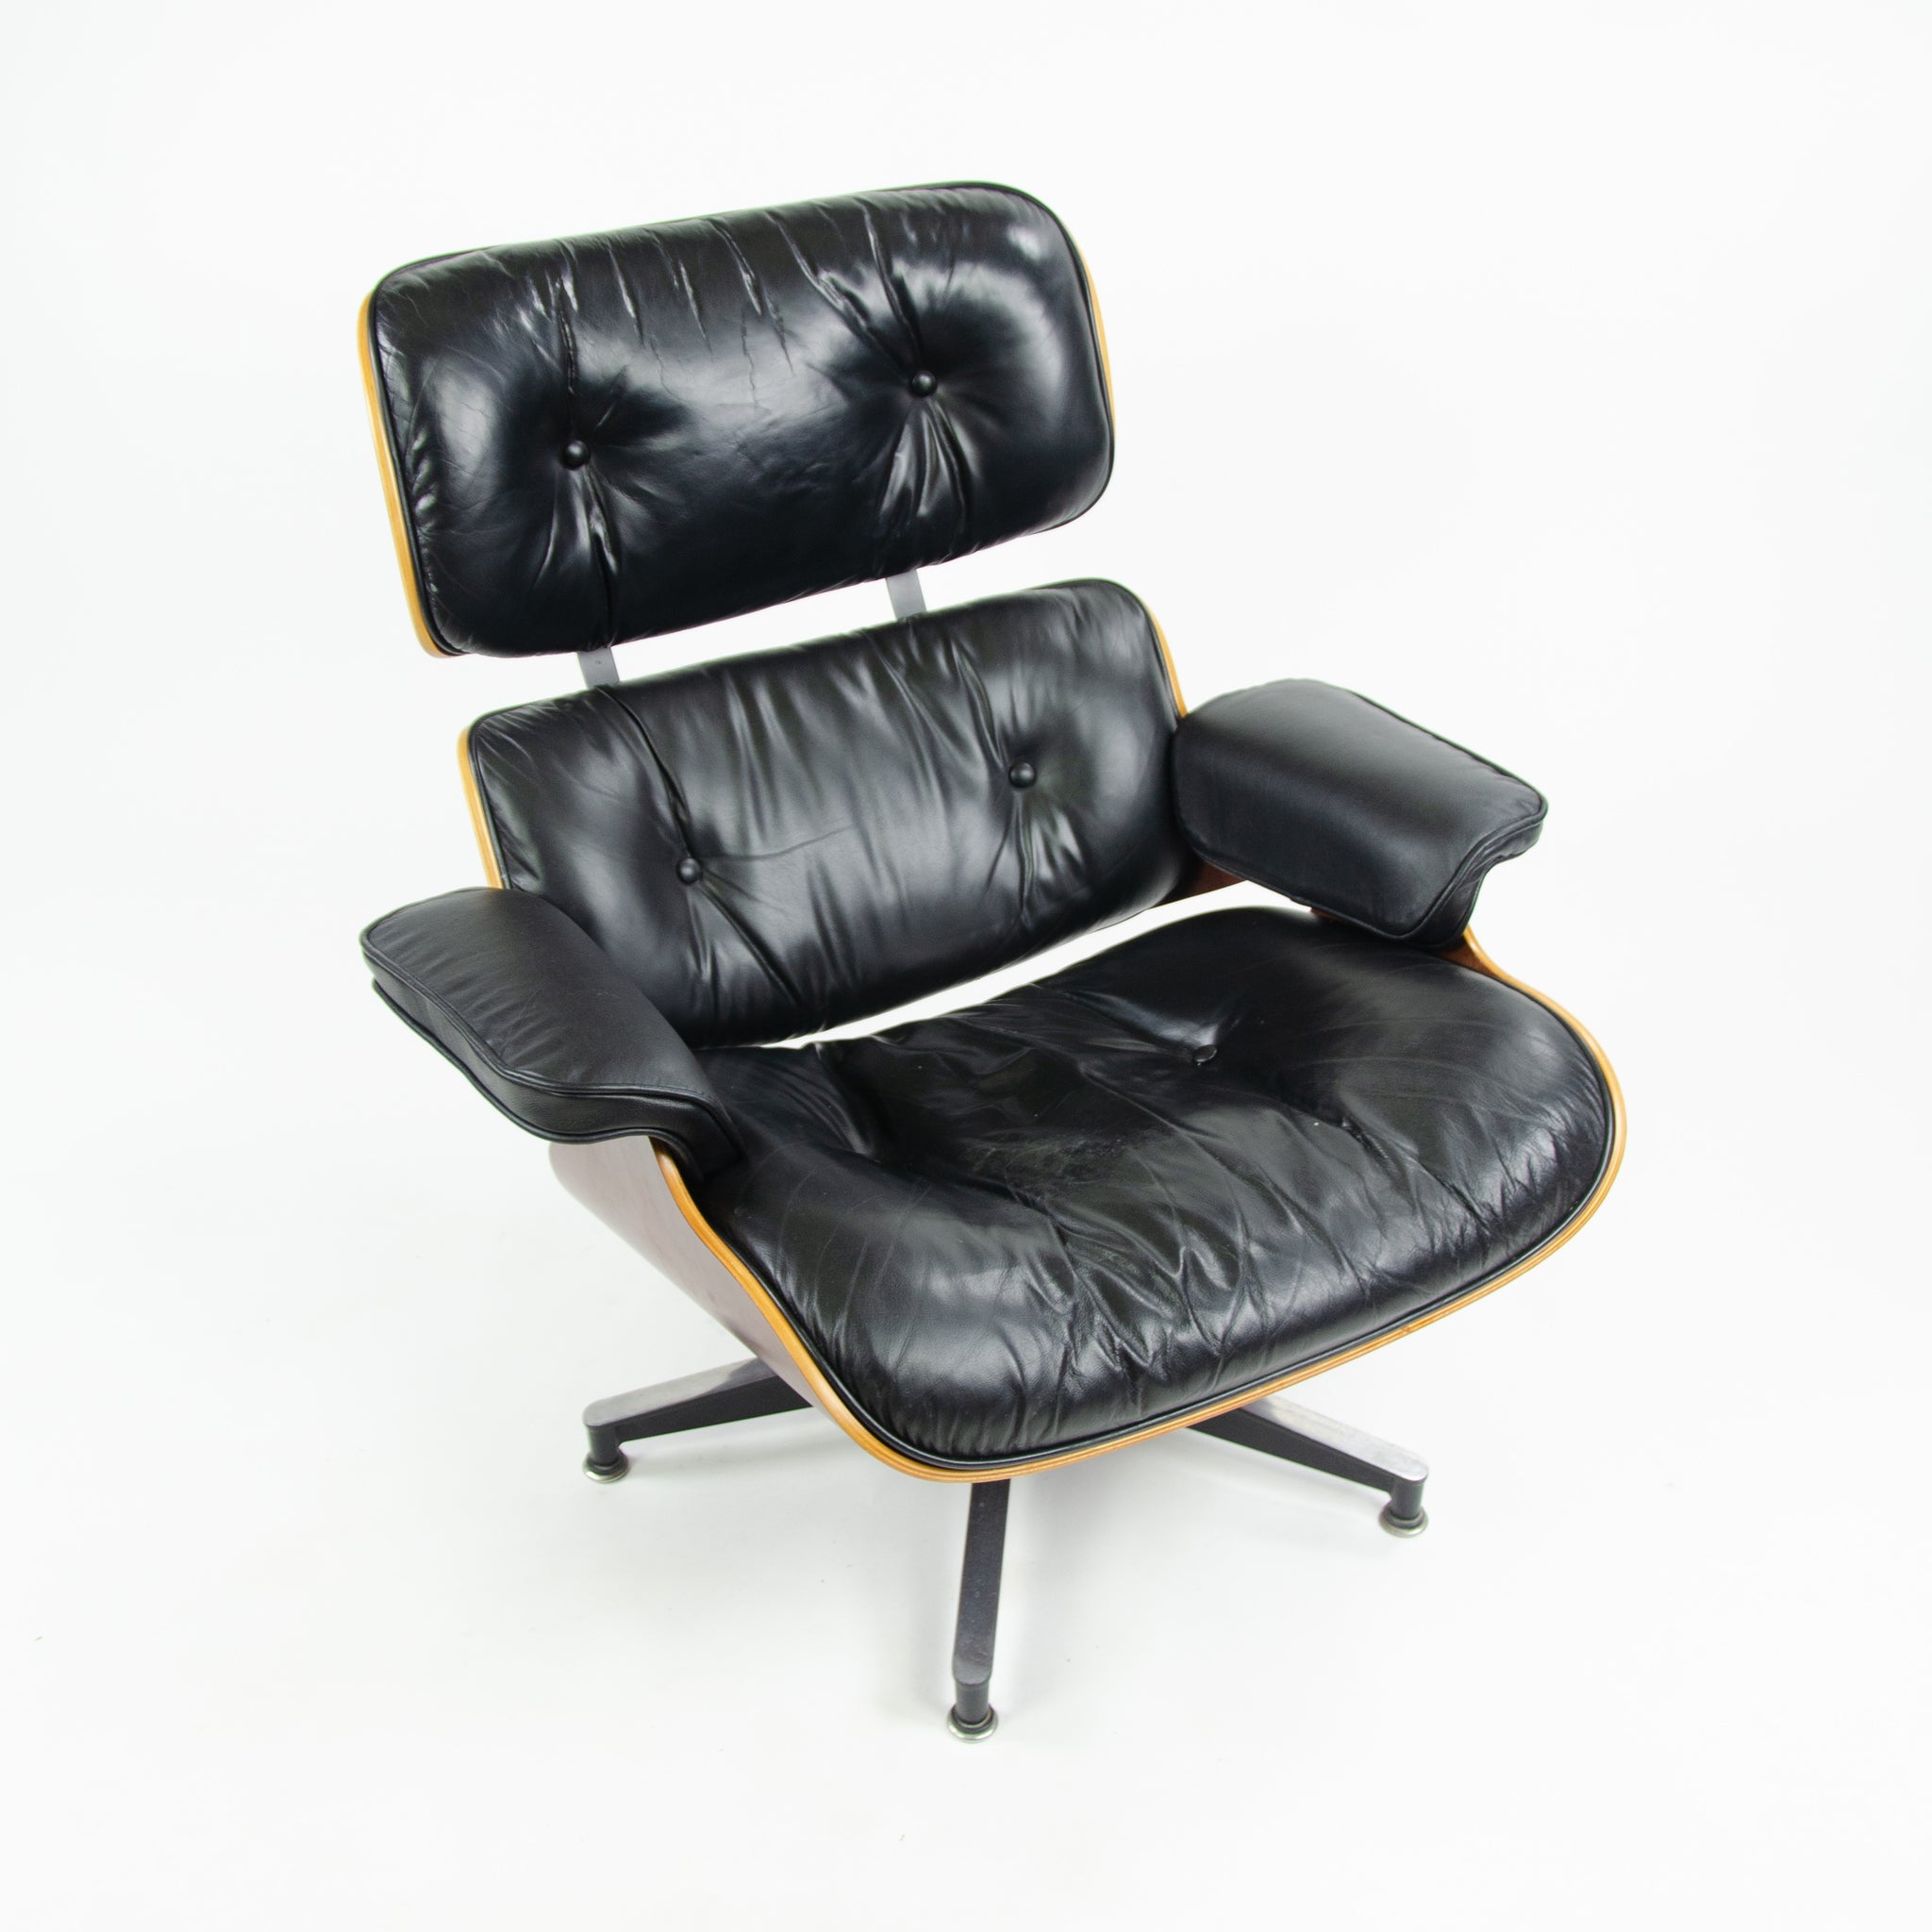 SOLD 2001 Herman Miller Eames Lounge Chair & Ottoman Cherry 670 671 Black Leather